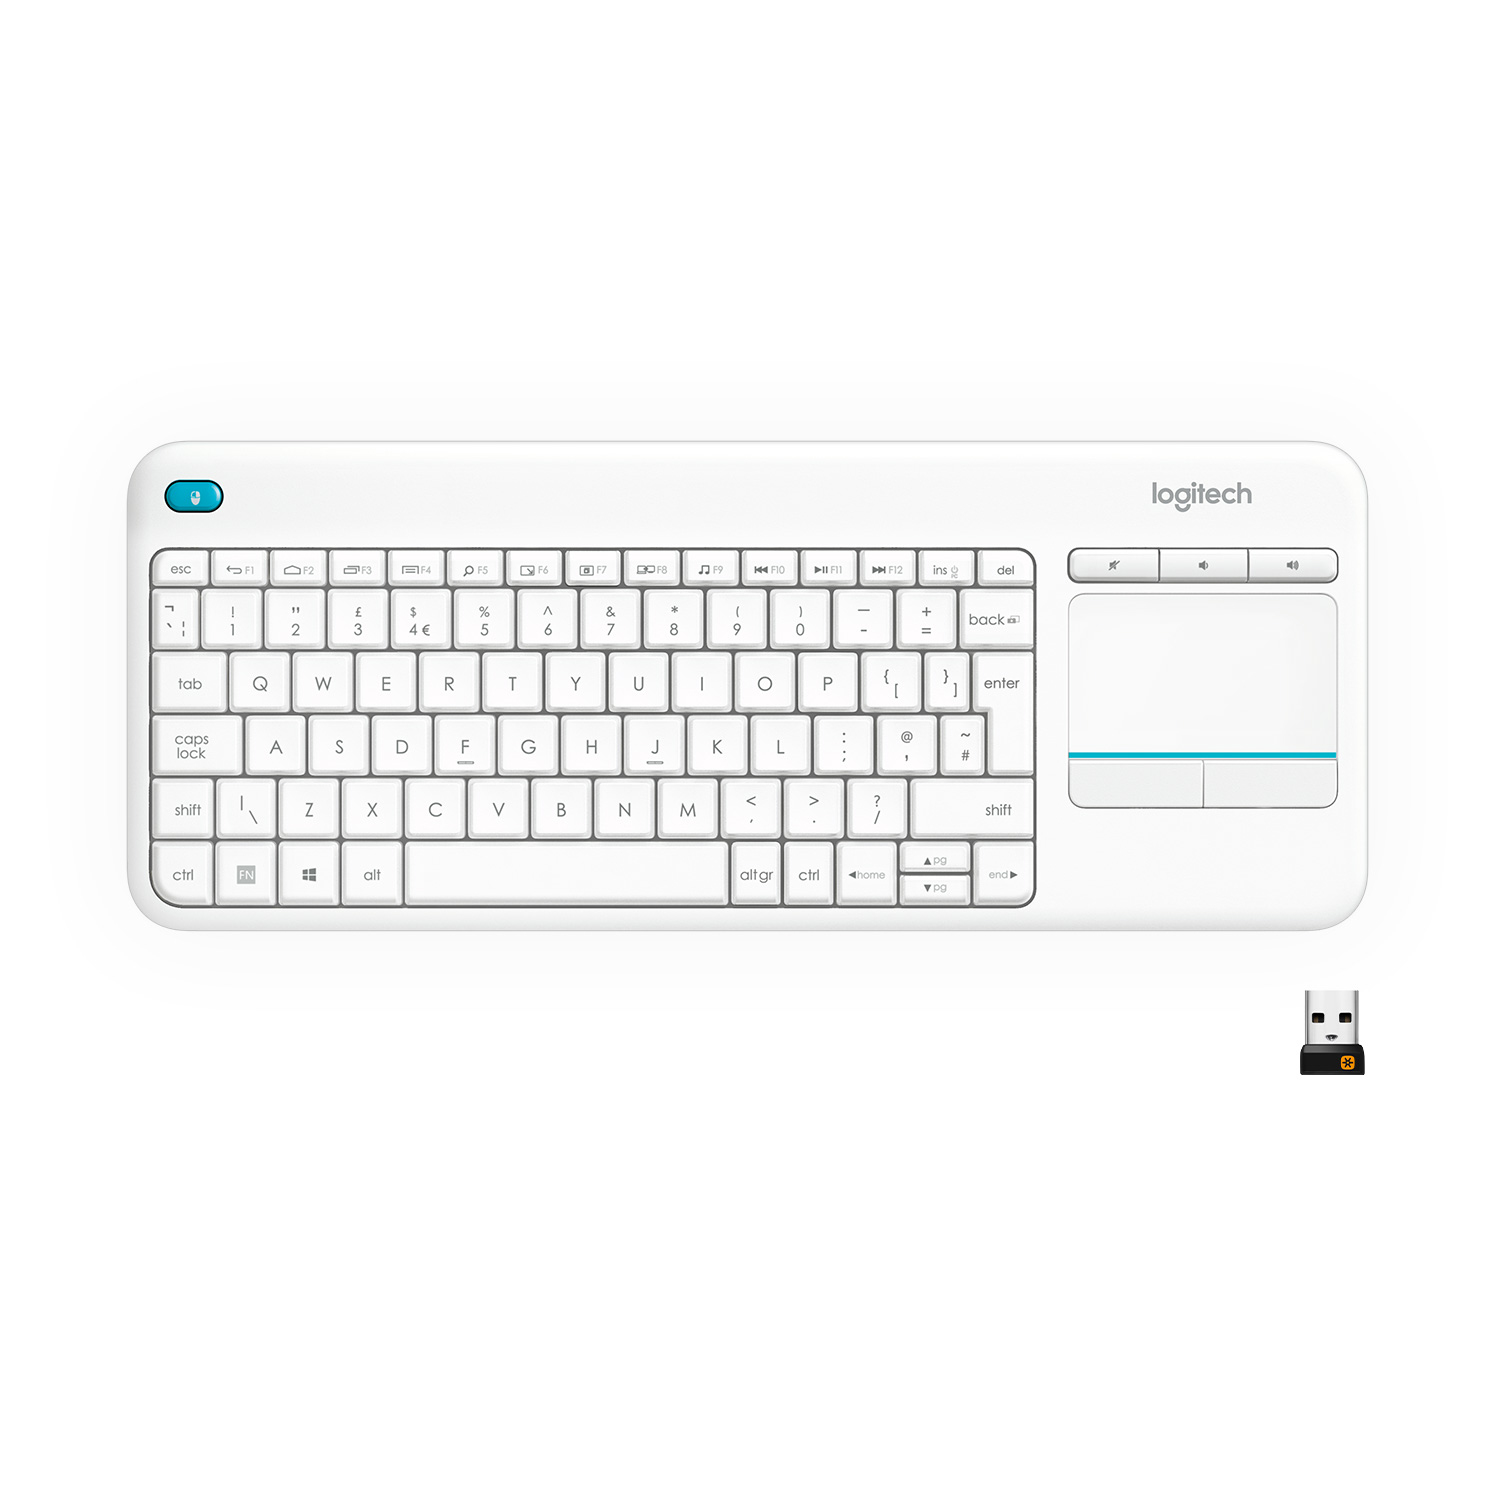 Kent modtagende Pris Logitech Wireless Touch K400 Plus keyboard RF Wireless QWERTY English  White, 0 in distributor/wholesale stock for resellers to sell - Stock In  The Channel